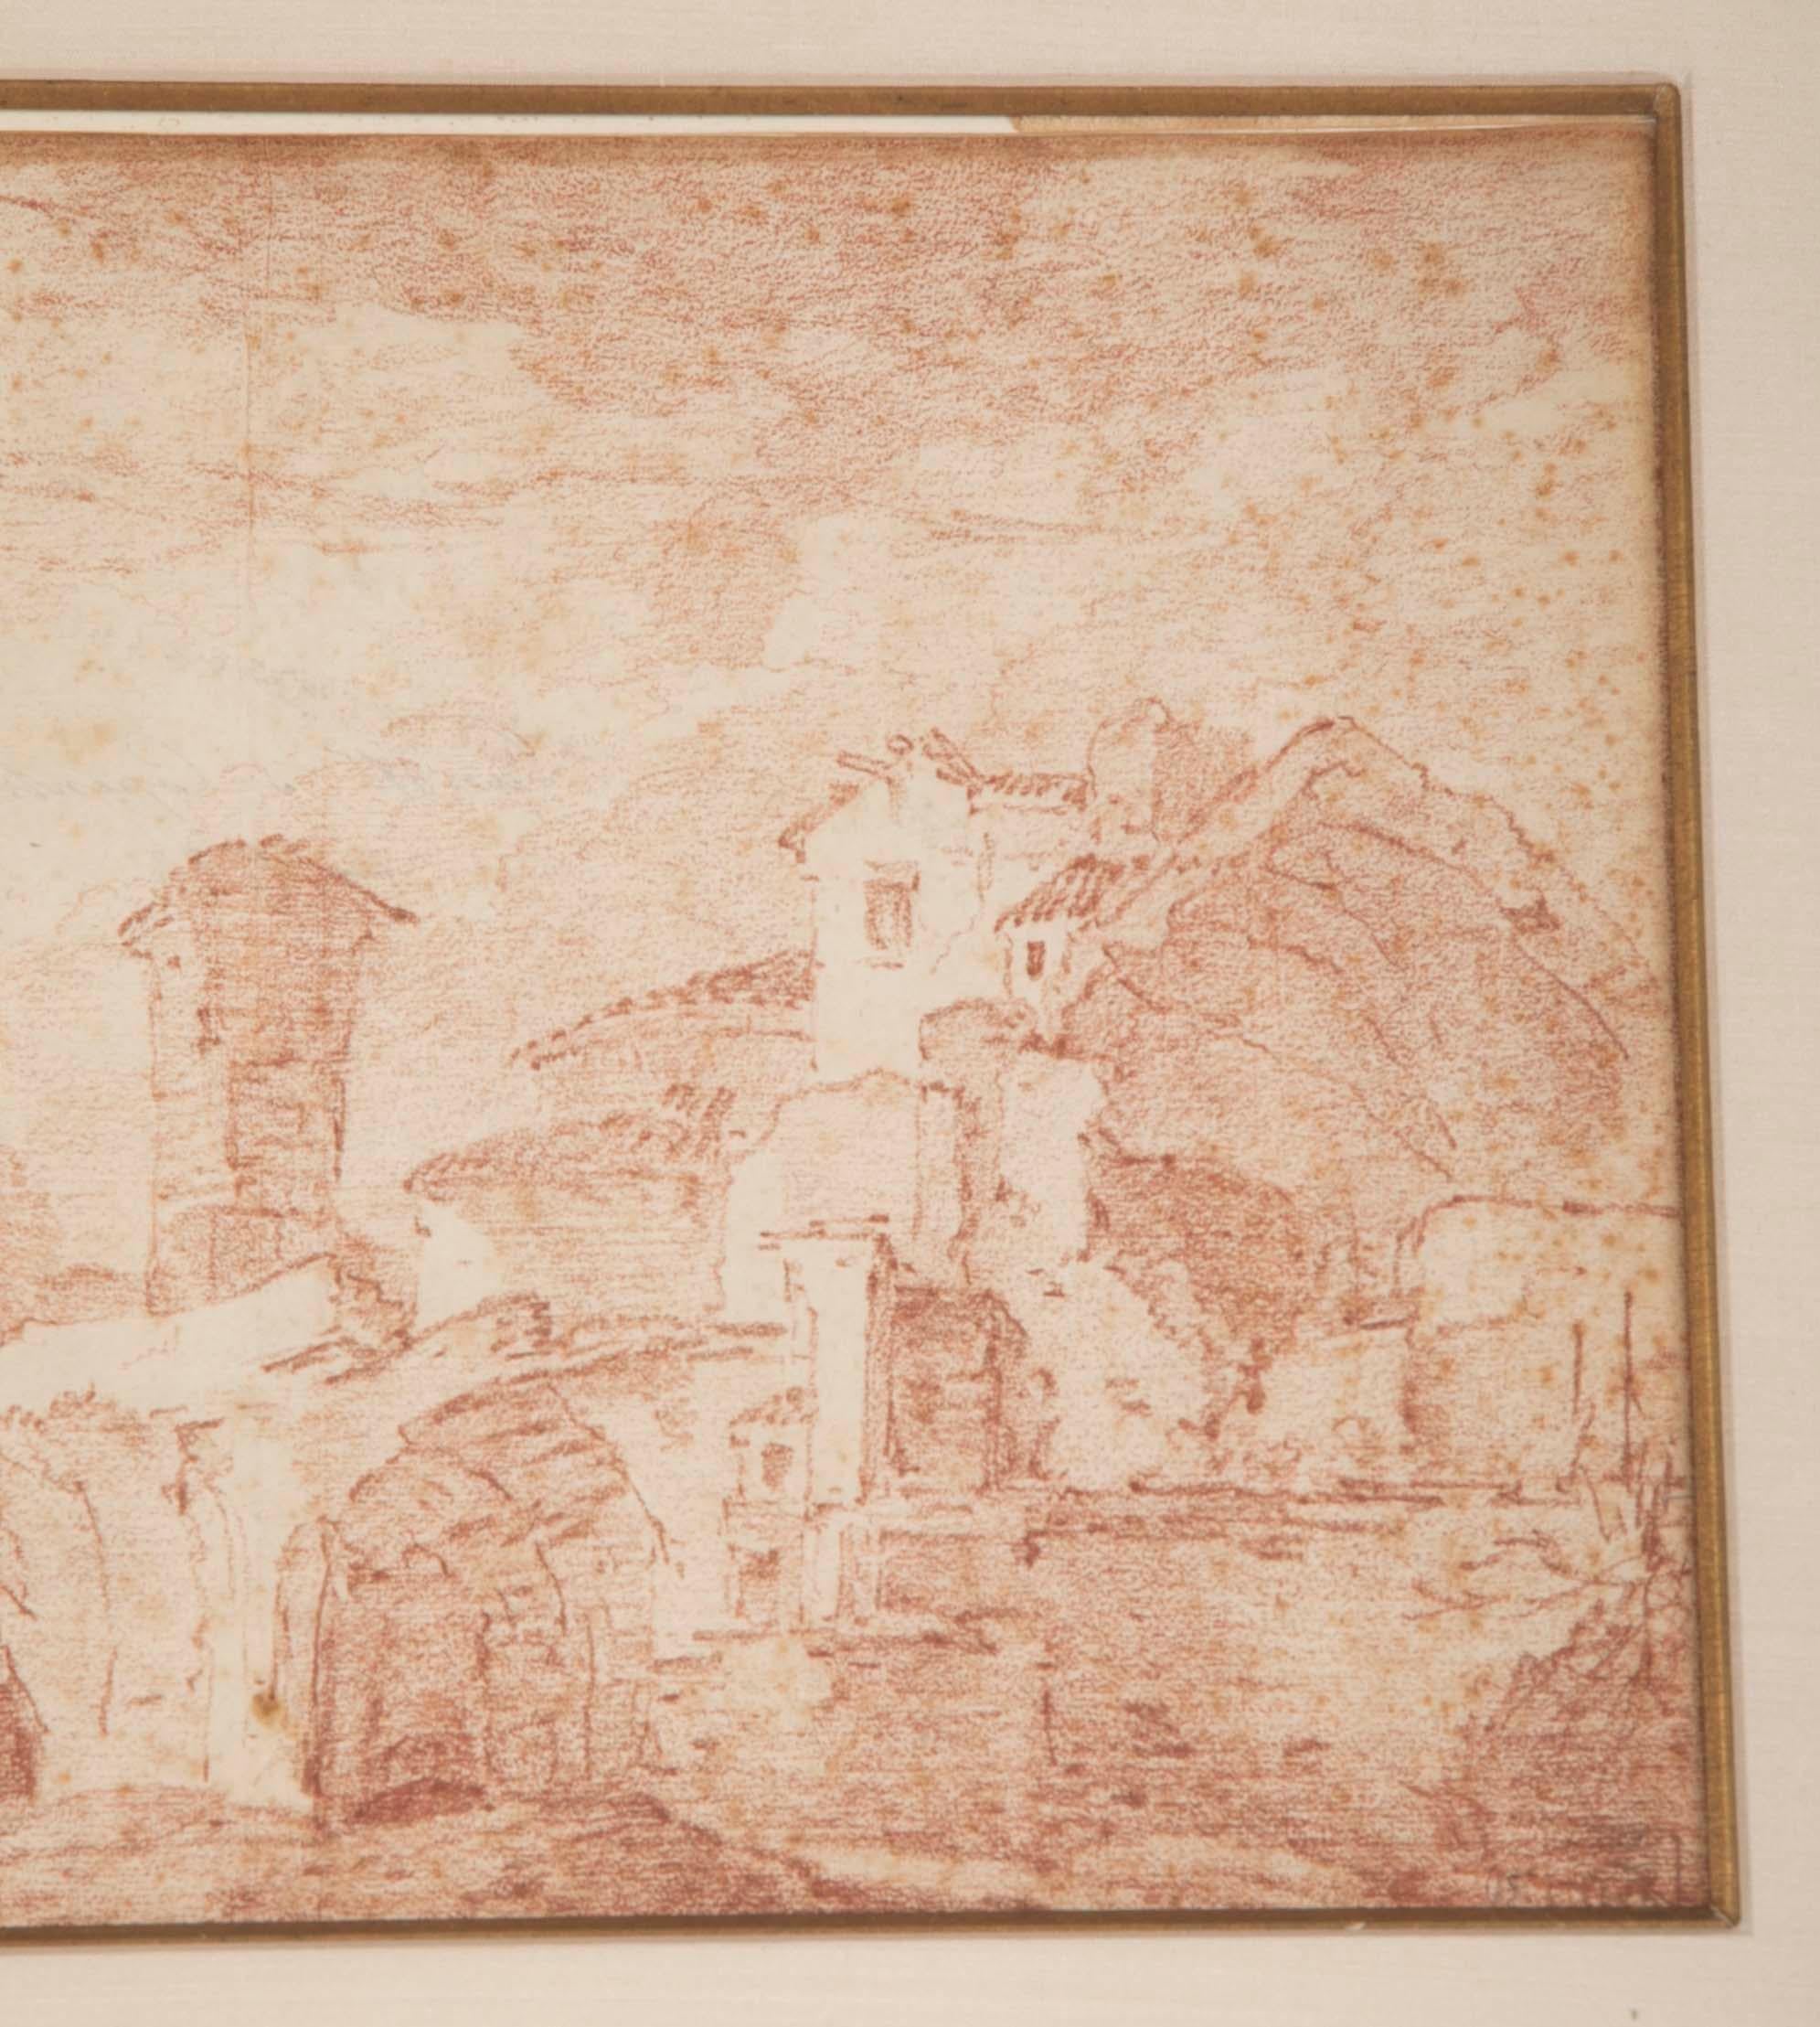 18th century Danish (?) red chalk drawing of a landscape with castle tower and ruins. This drawing has a very Roman or Italian feel to it, possibly a Scandinavian artist who traveled to Rome or an Italian artist in Denmark. It has two monogram